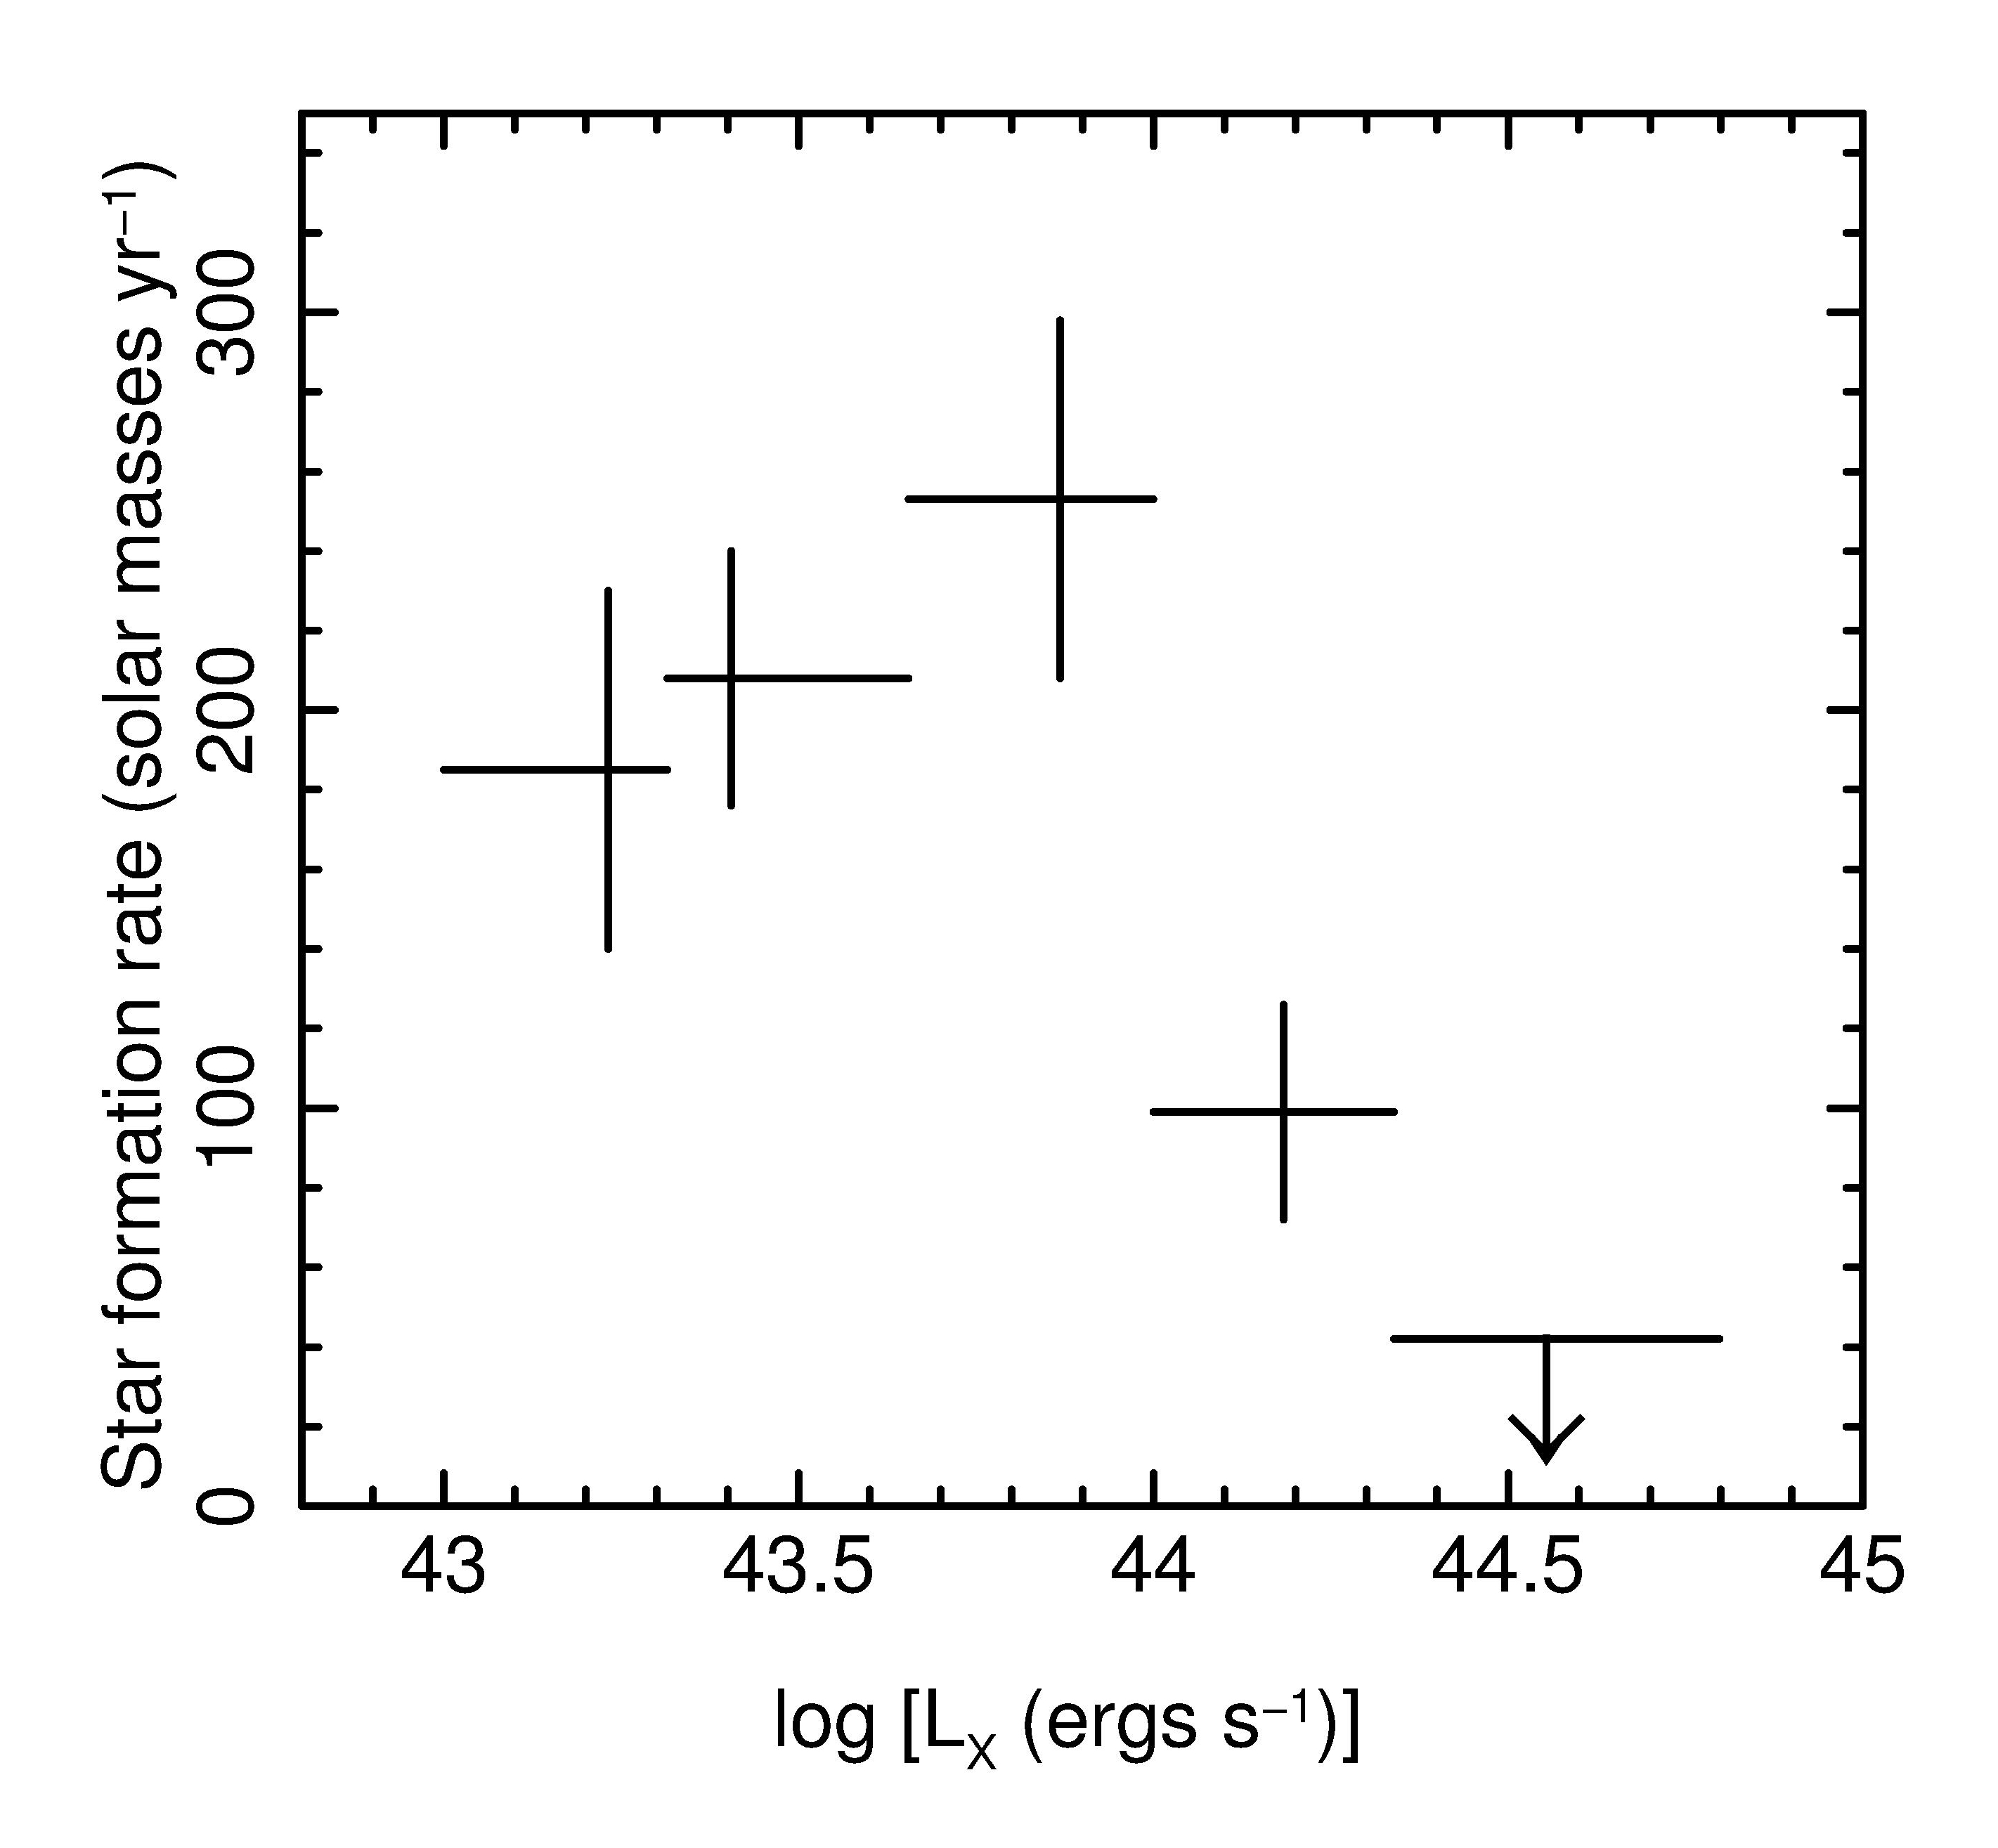 Star formation rate as a function of X-ray brightness for a sample of high-redshift galaxies. Copyright: Image courtesy of Mathew Page, Mullard Space Science Laboratory, UK